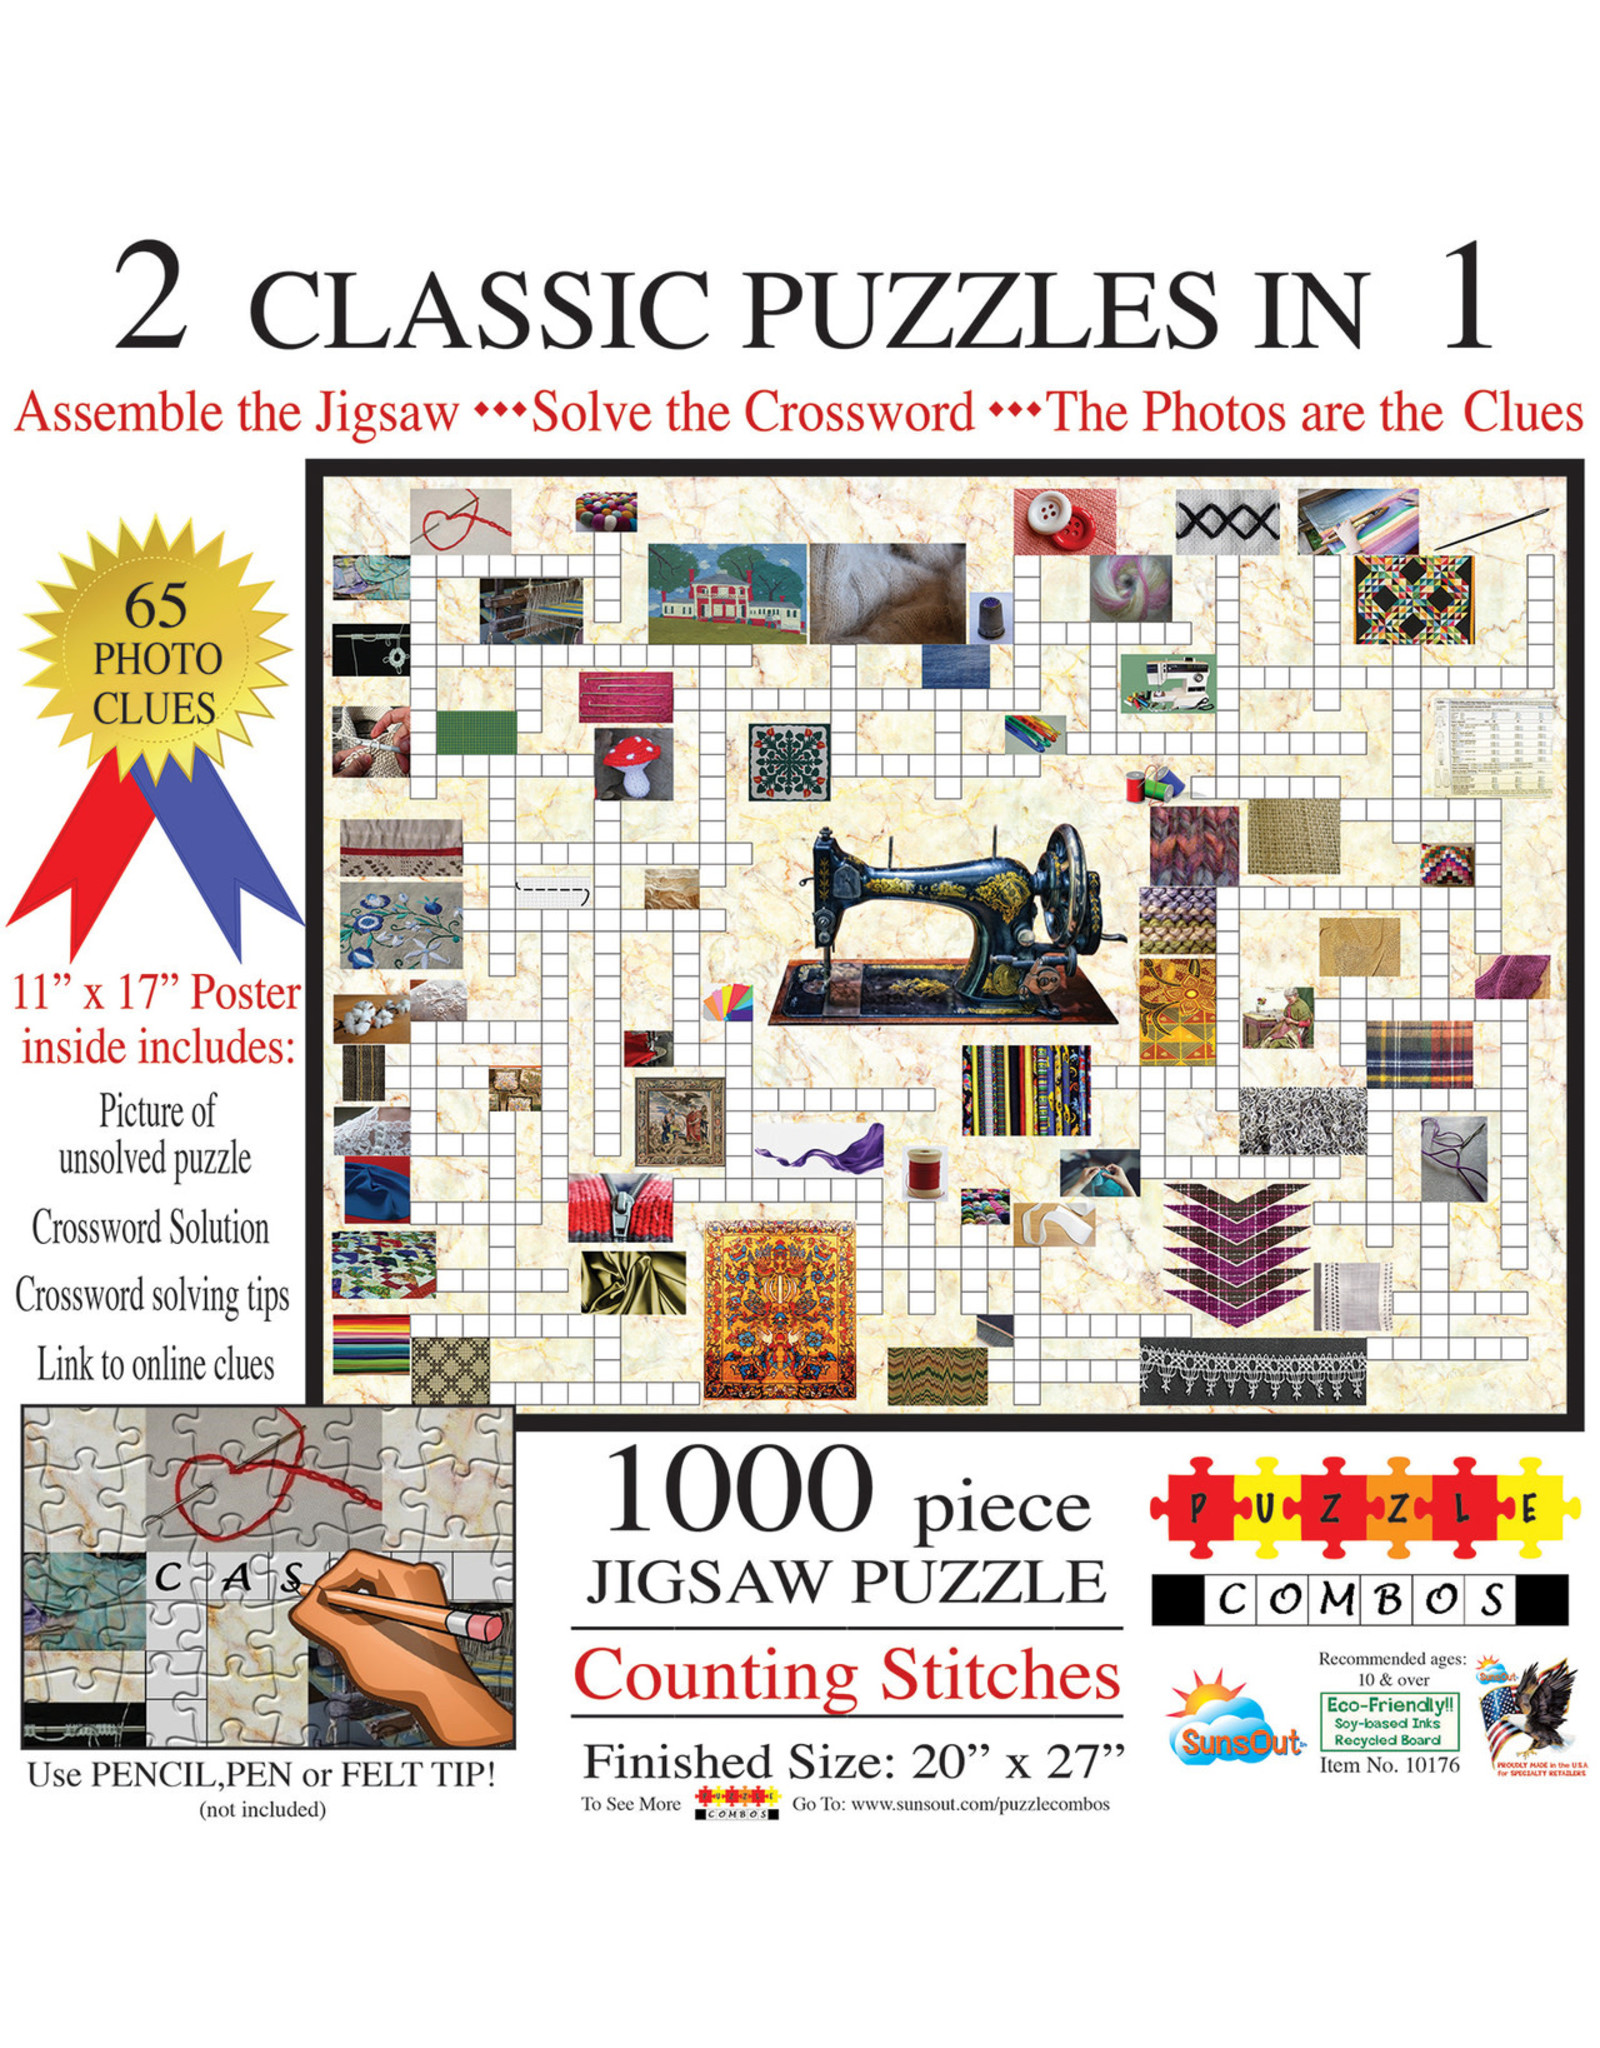 Counting Stitches: 2 Classic Puzzles in 1 1000 pc